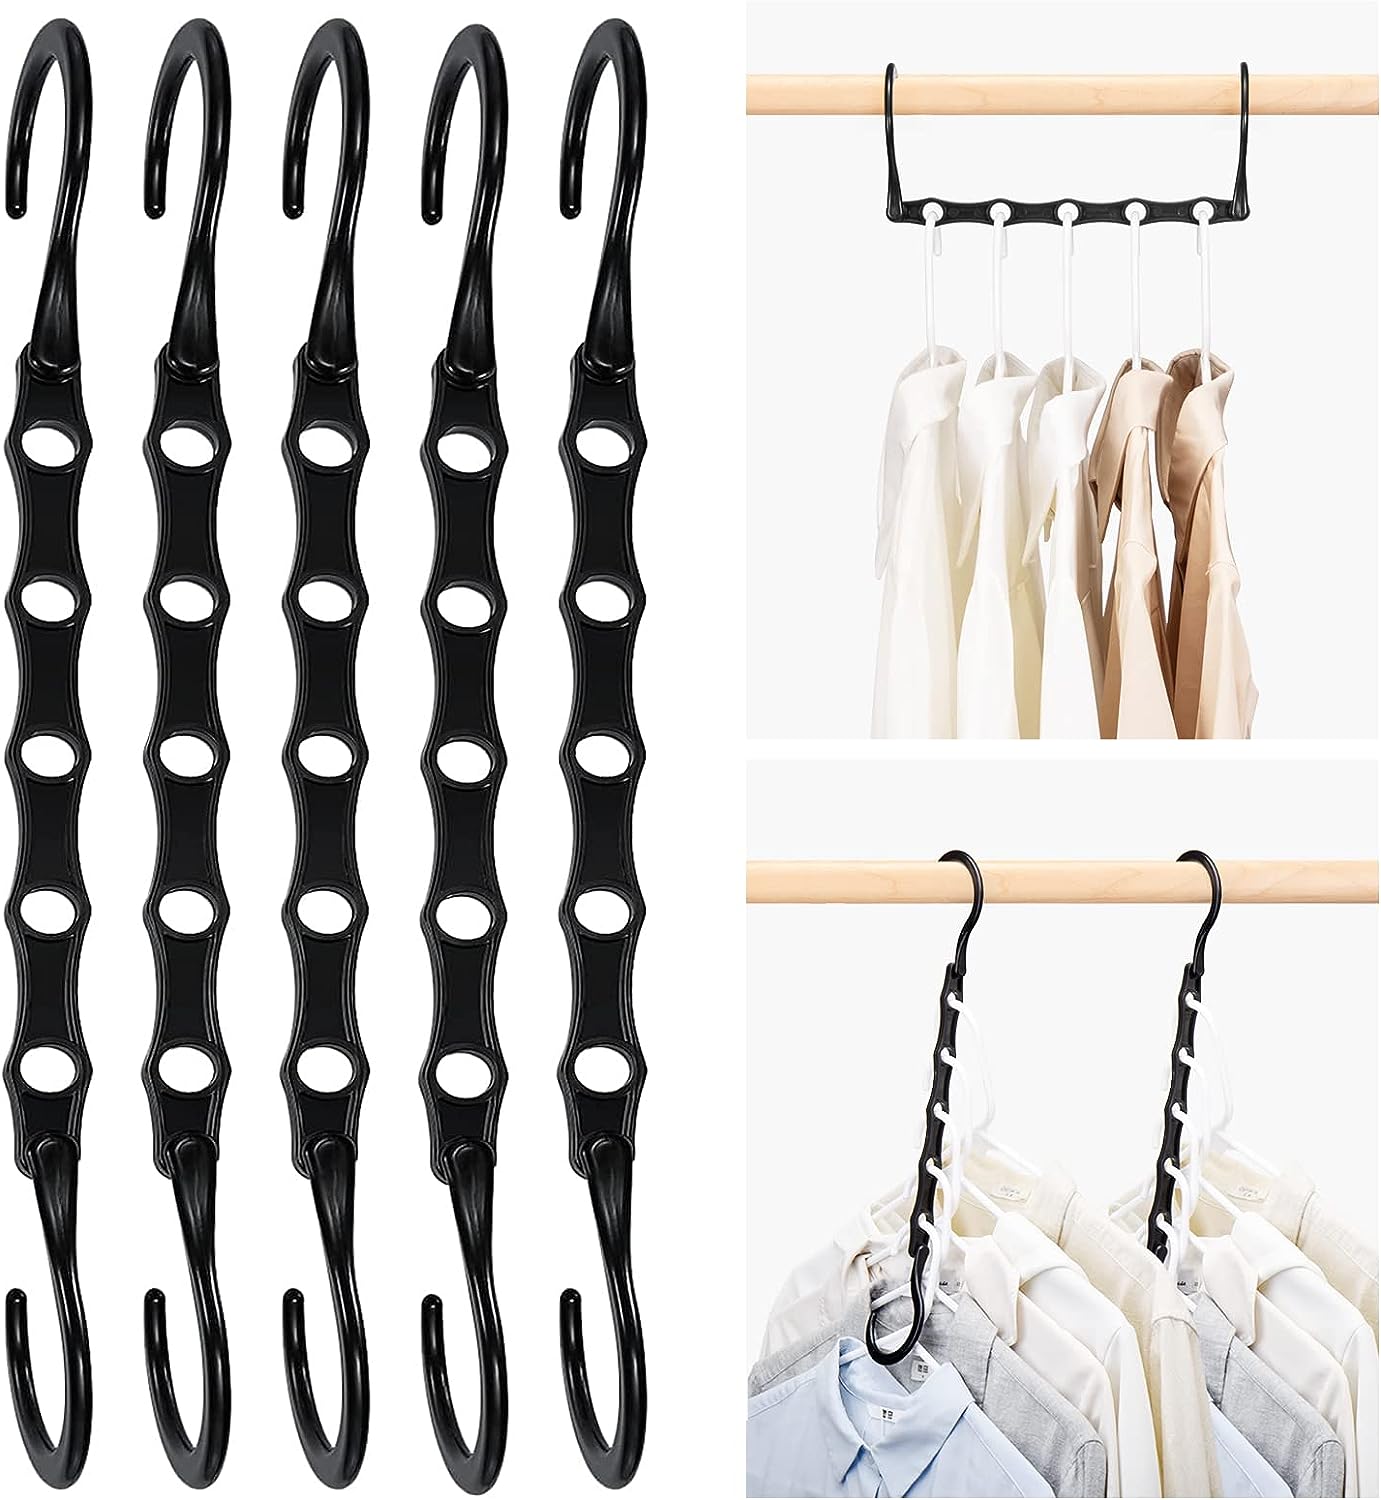 HOUSE DAY 15 Inch Plastic Hangers Space Saving Organizers Black 20 Pack